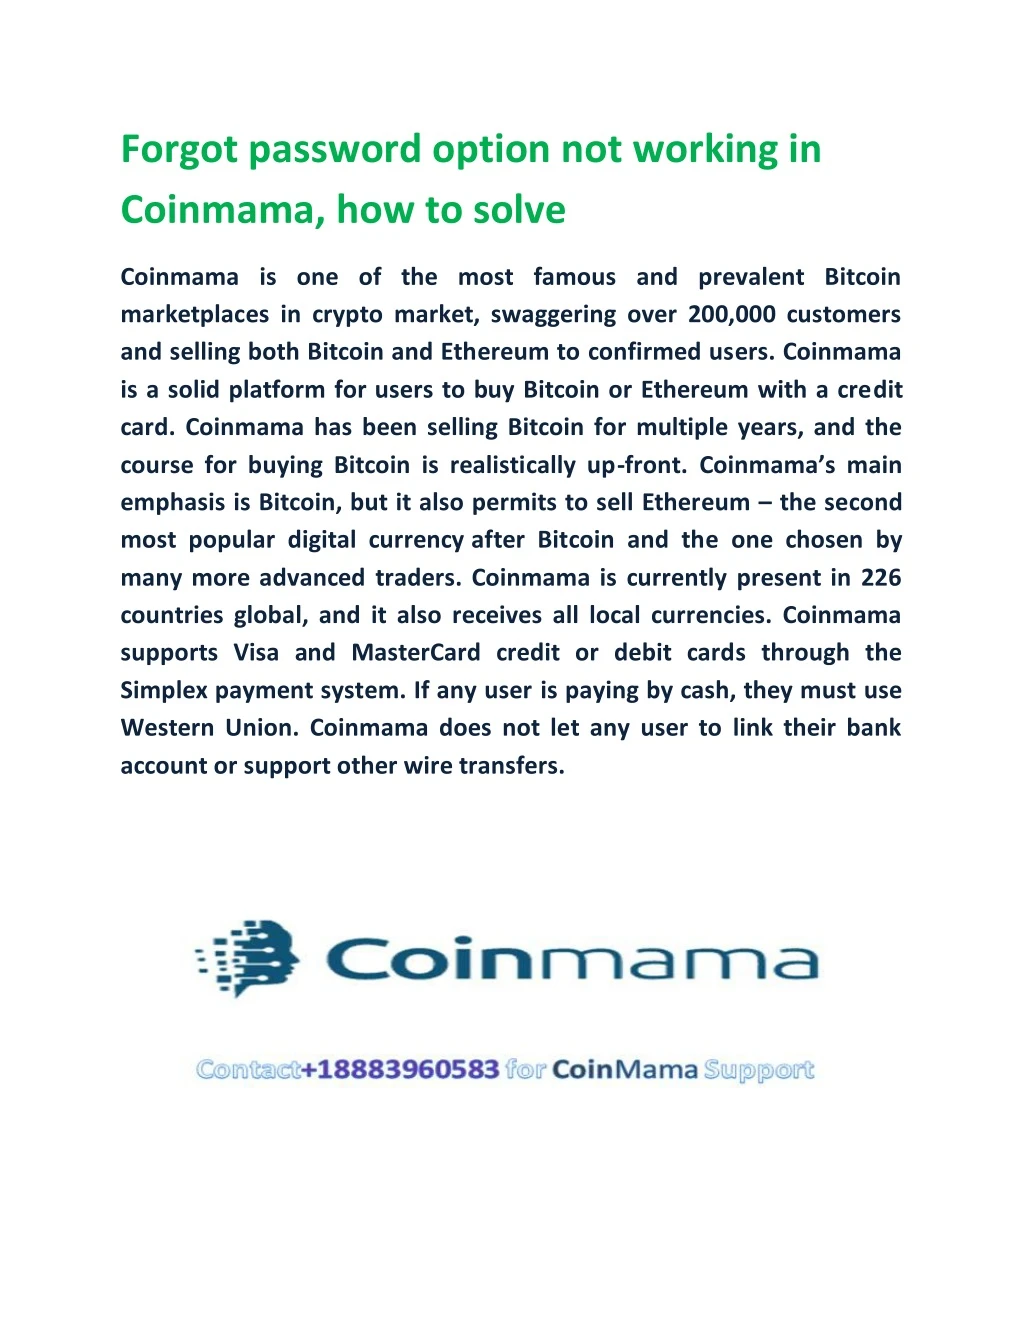 forgot password option not working in coinmama